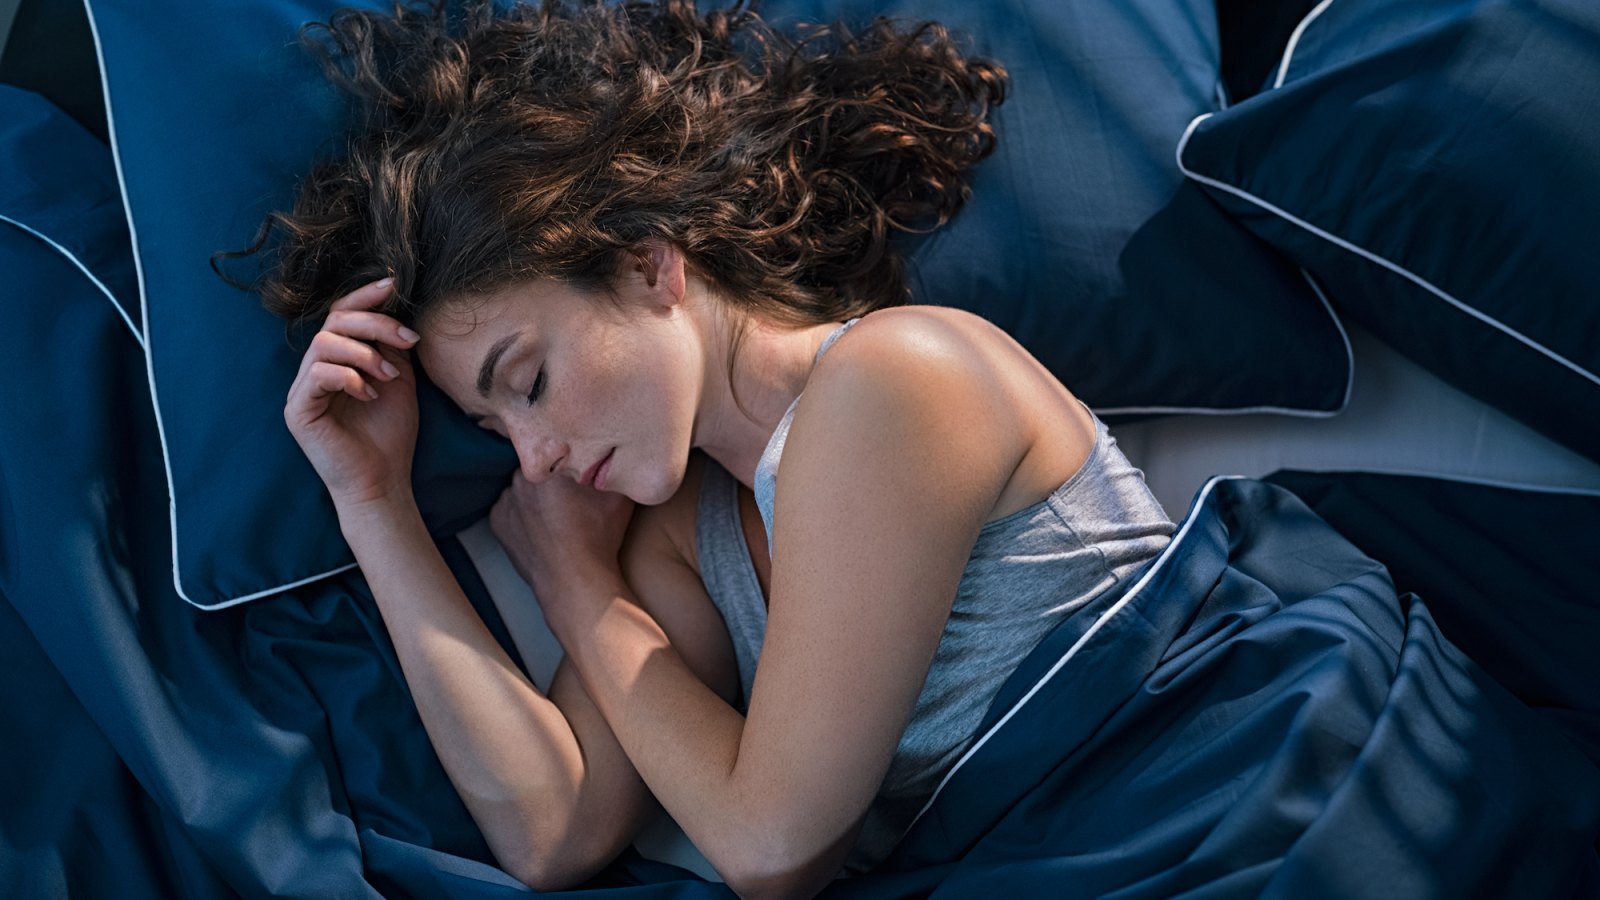 Woman-Sleeping-In-Bed-Stock-Photo